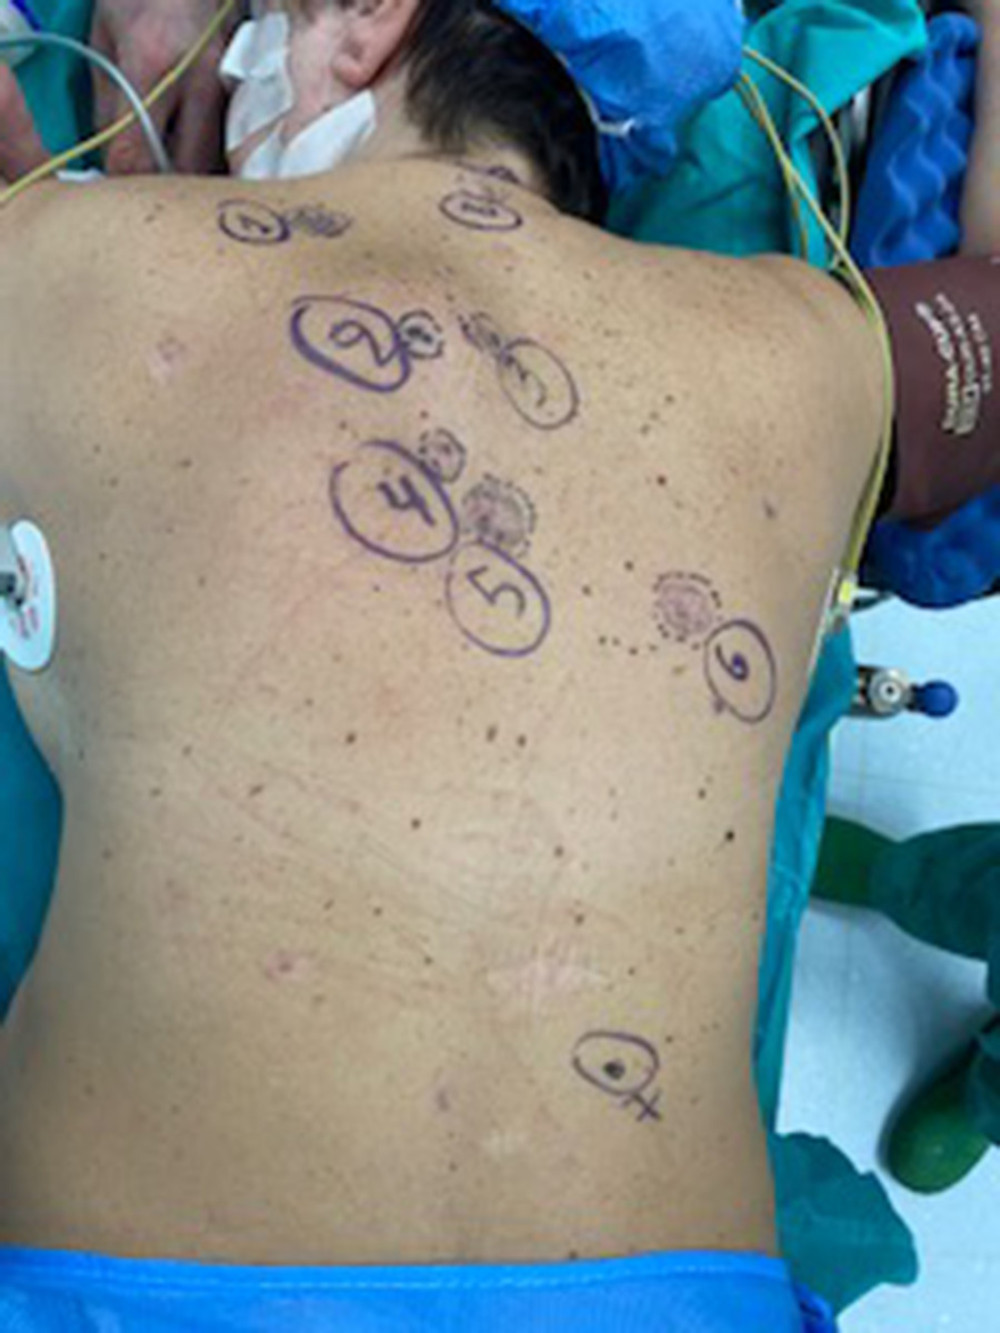 Preoperative photograph showing multiple pigmented skin lesions on the posterior trunk.